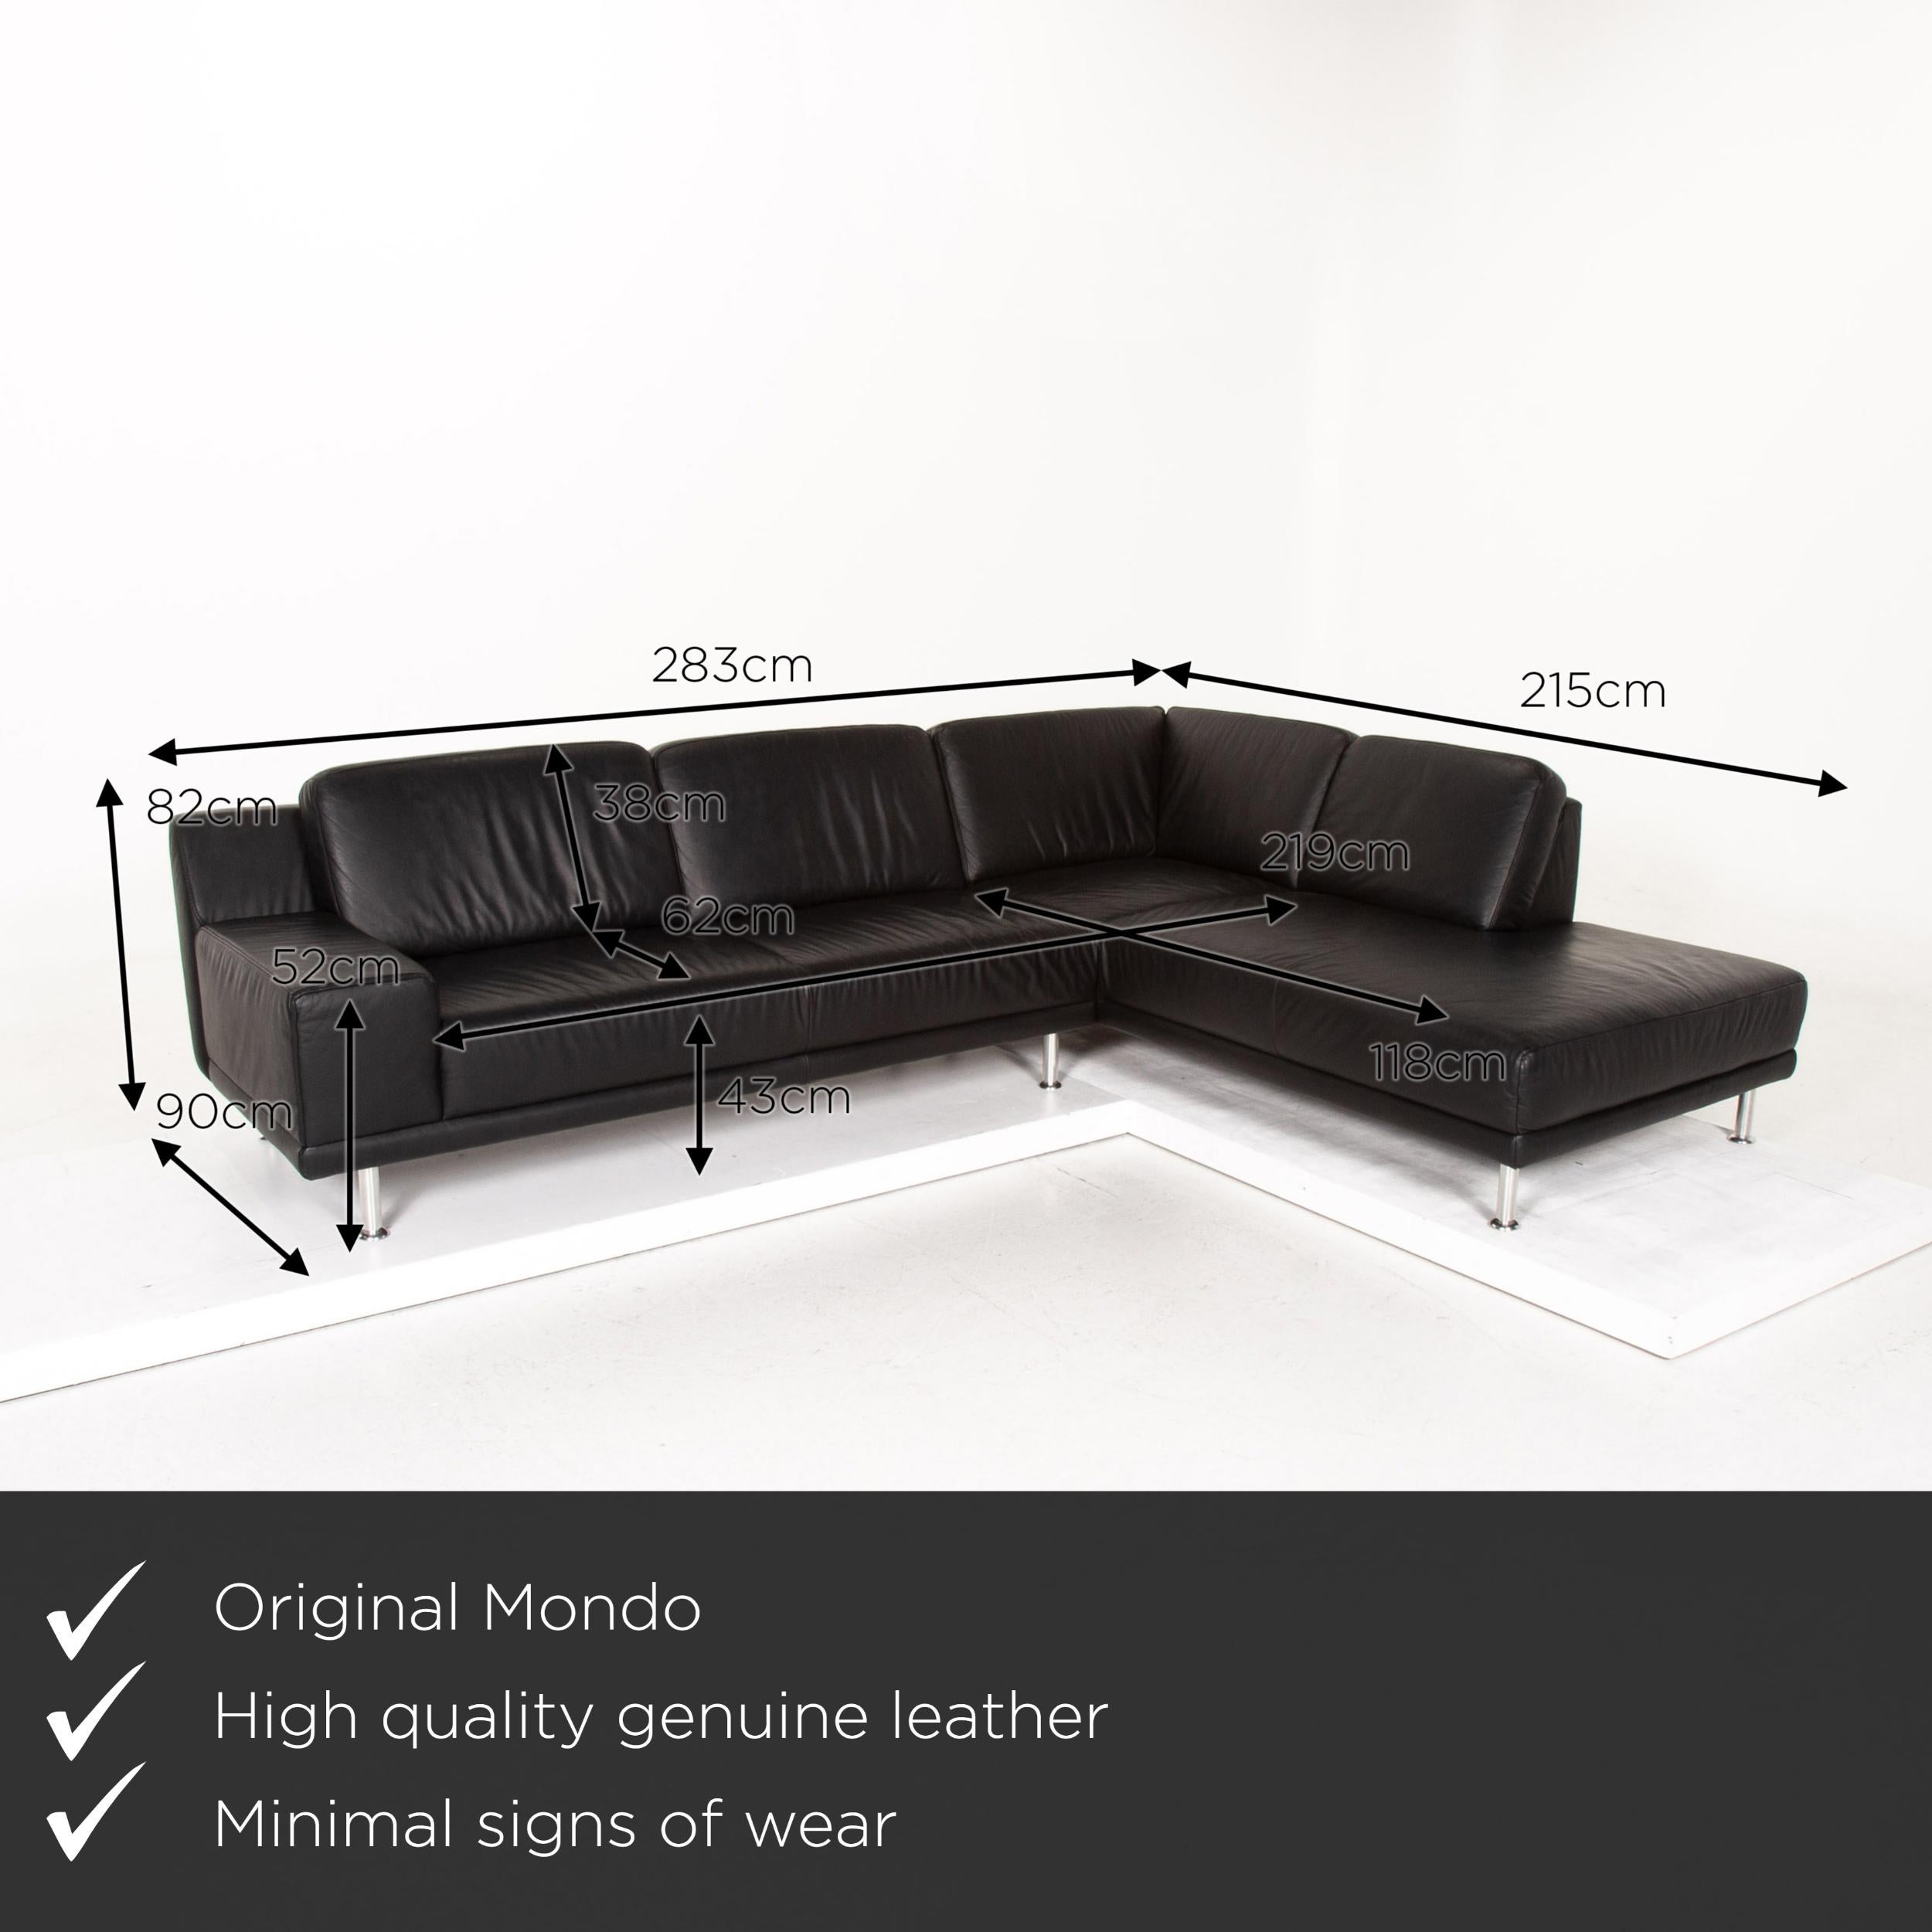 We present to you a Mondo leather corner sofa black sofa couch.


 Product measurements in centimeters:
 

Depth 90
Width 283
Height 82
Seat height 43
Rest height 52
Seat depth 62
Seat width 219
Back height 38.

 